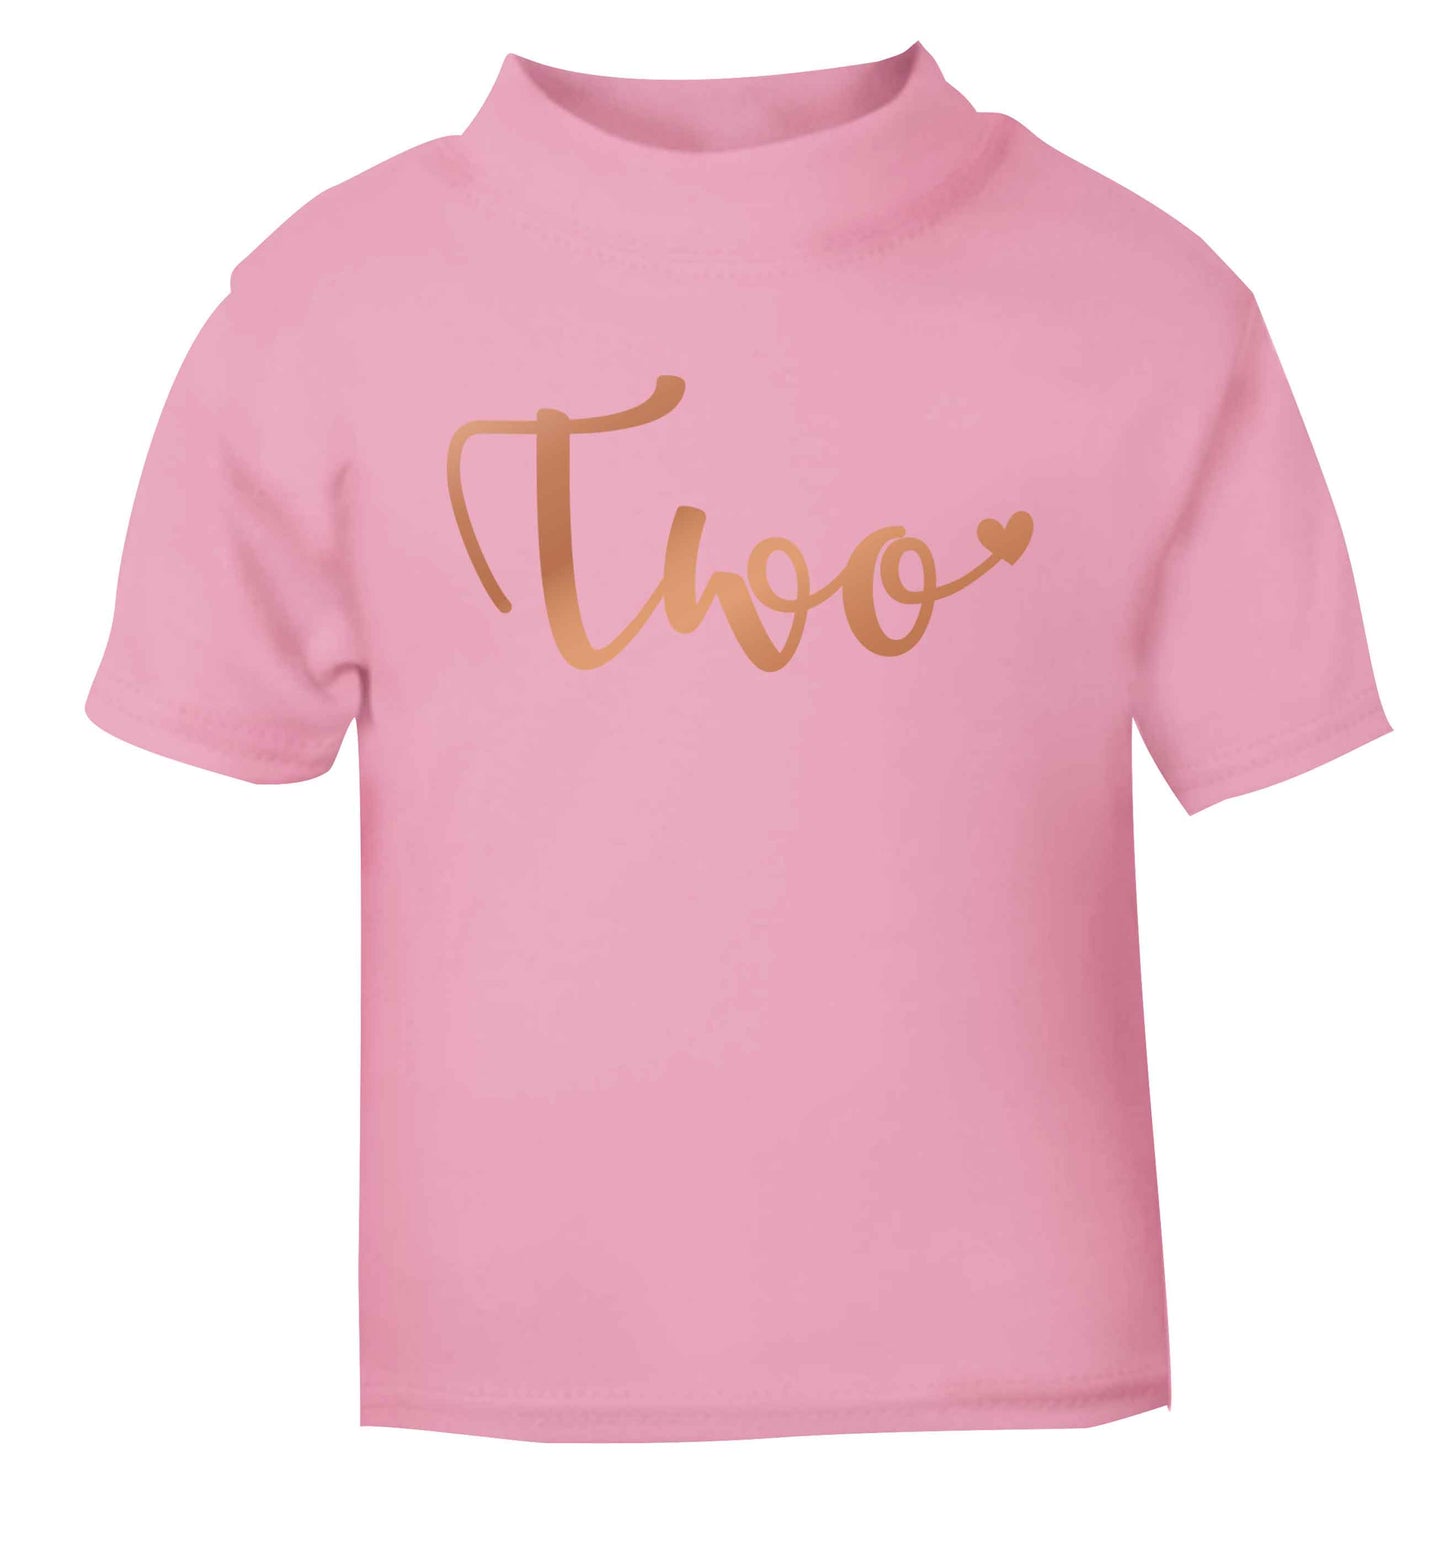 Two rose gold light pink baby toddler Tshirt 2 Years